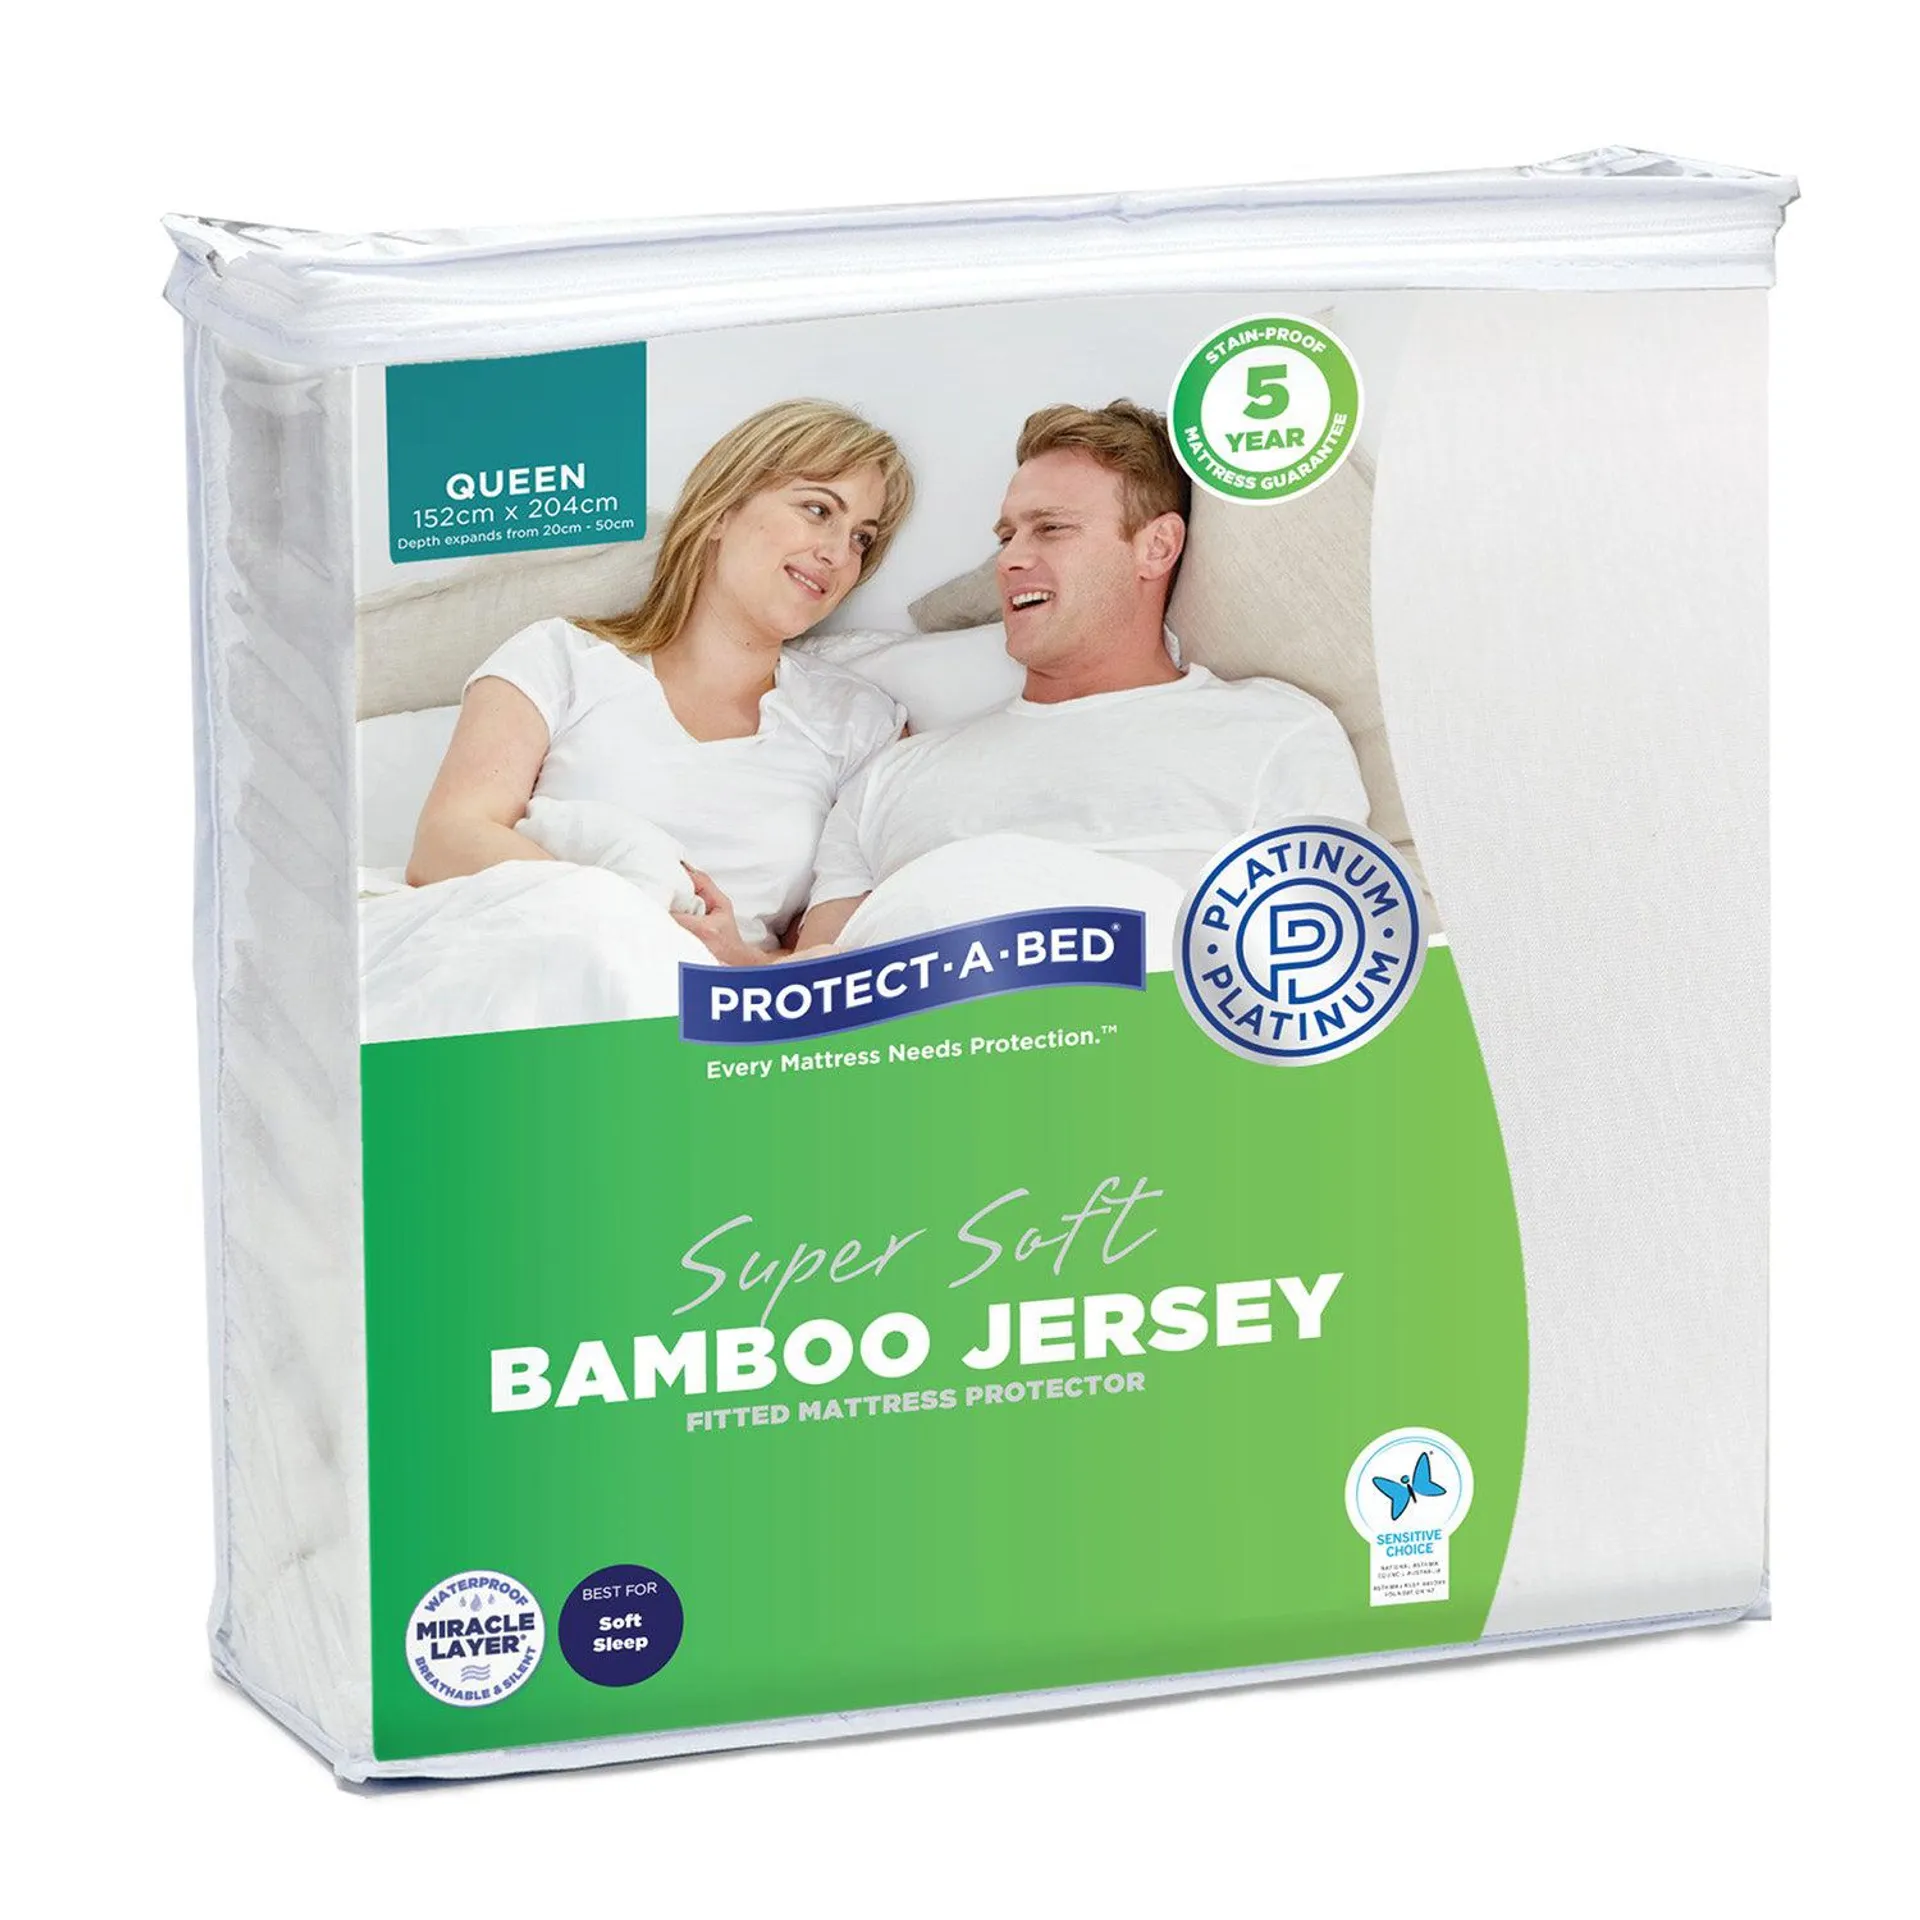 Protect-A-Bed Bamboo Jersey Fitted Waterproof California King Mattress Protector